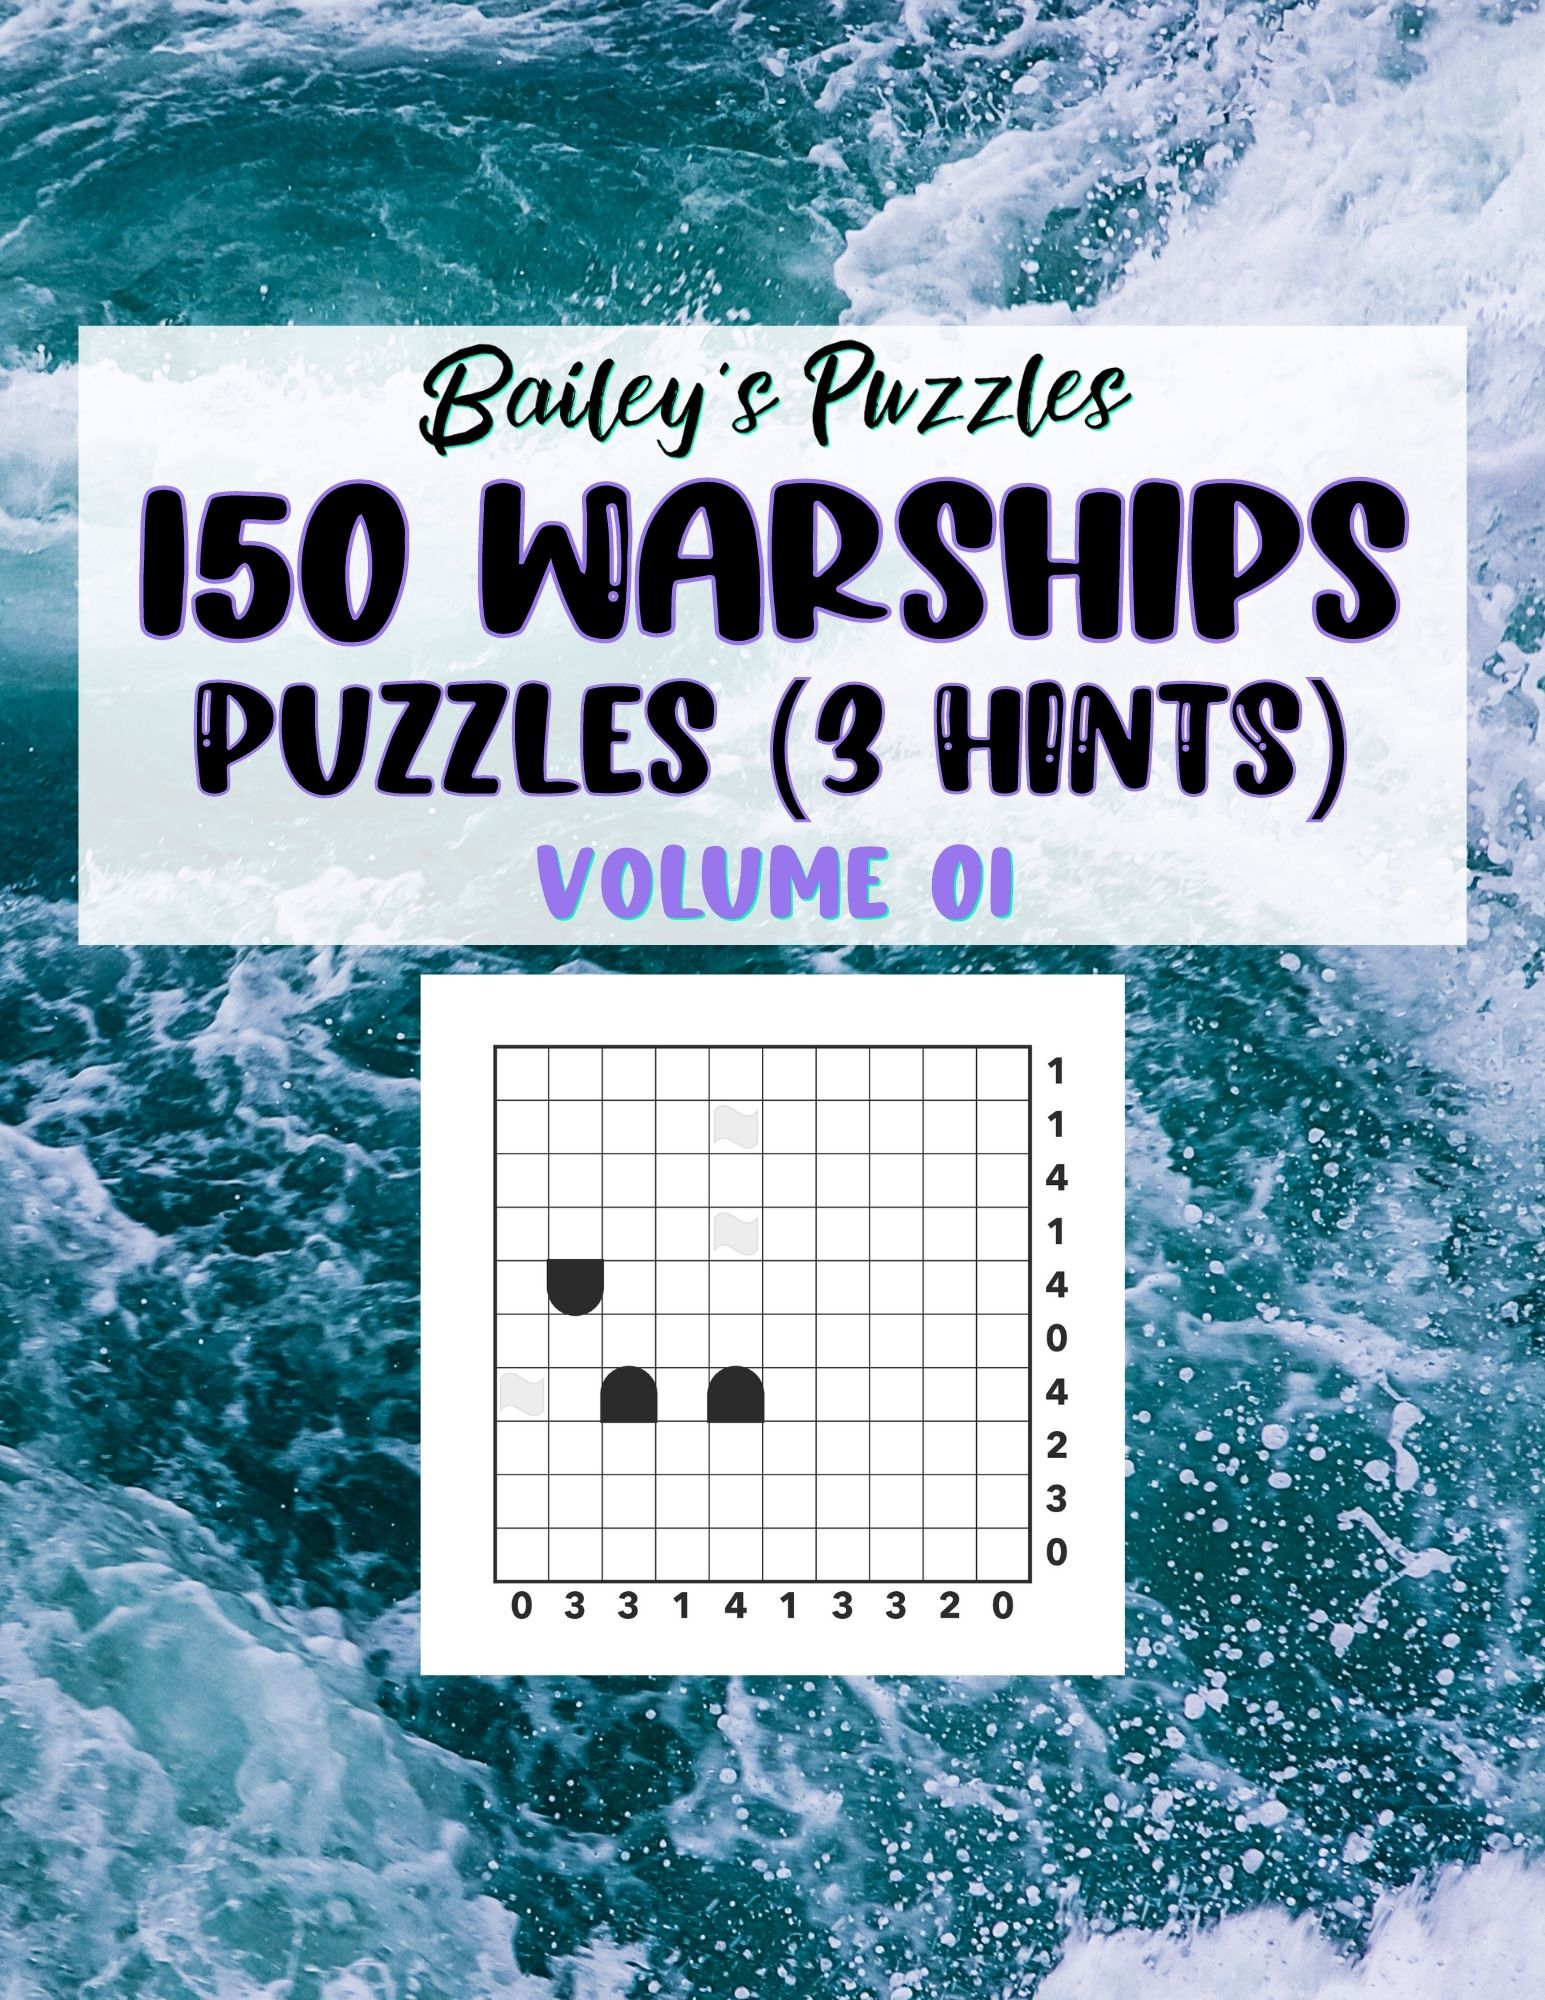 Front Cover - 150 Warships Puzzles (3 hints)